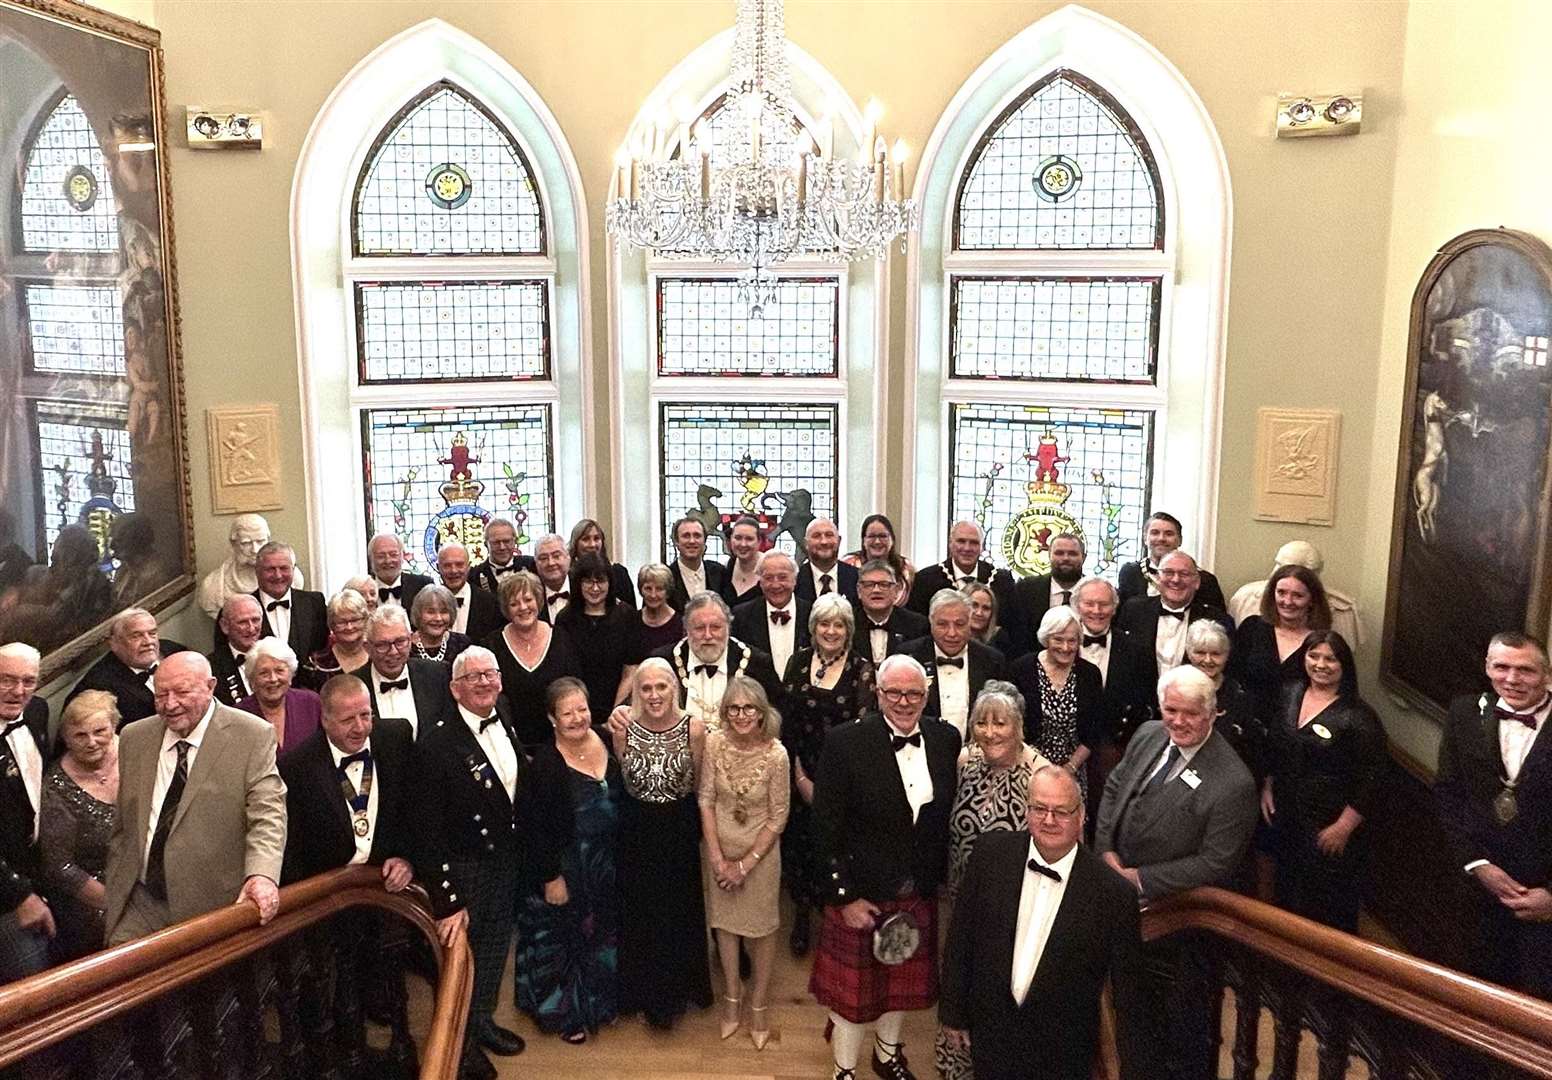 Expert plumbers from Inverness and furher afield were honoured with a civic dinner at the city's town house.